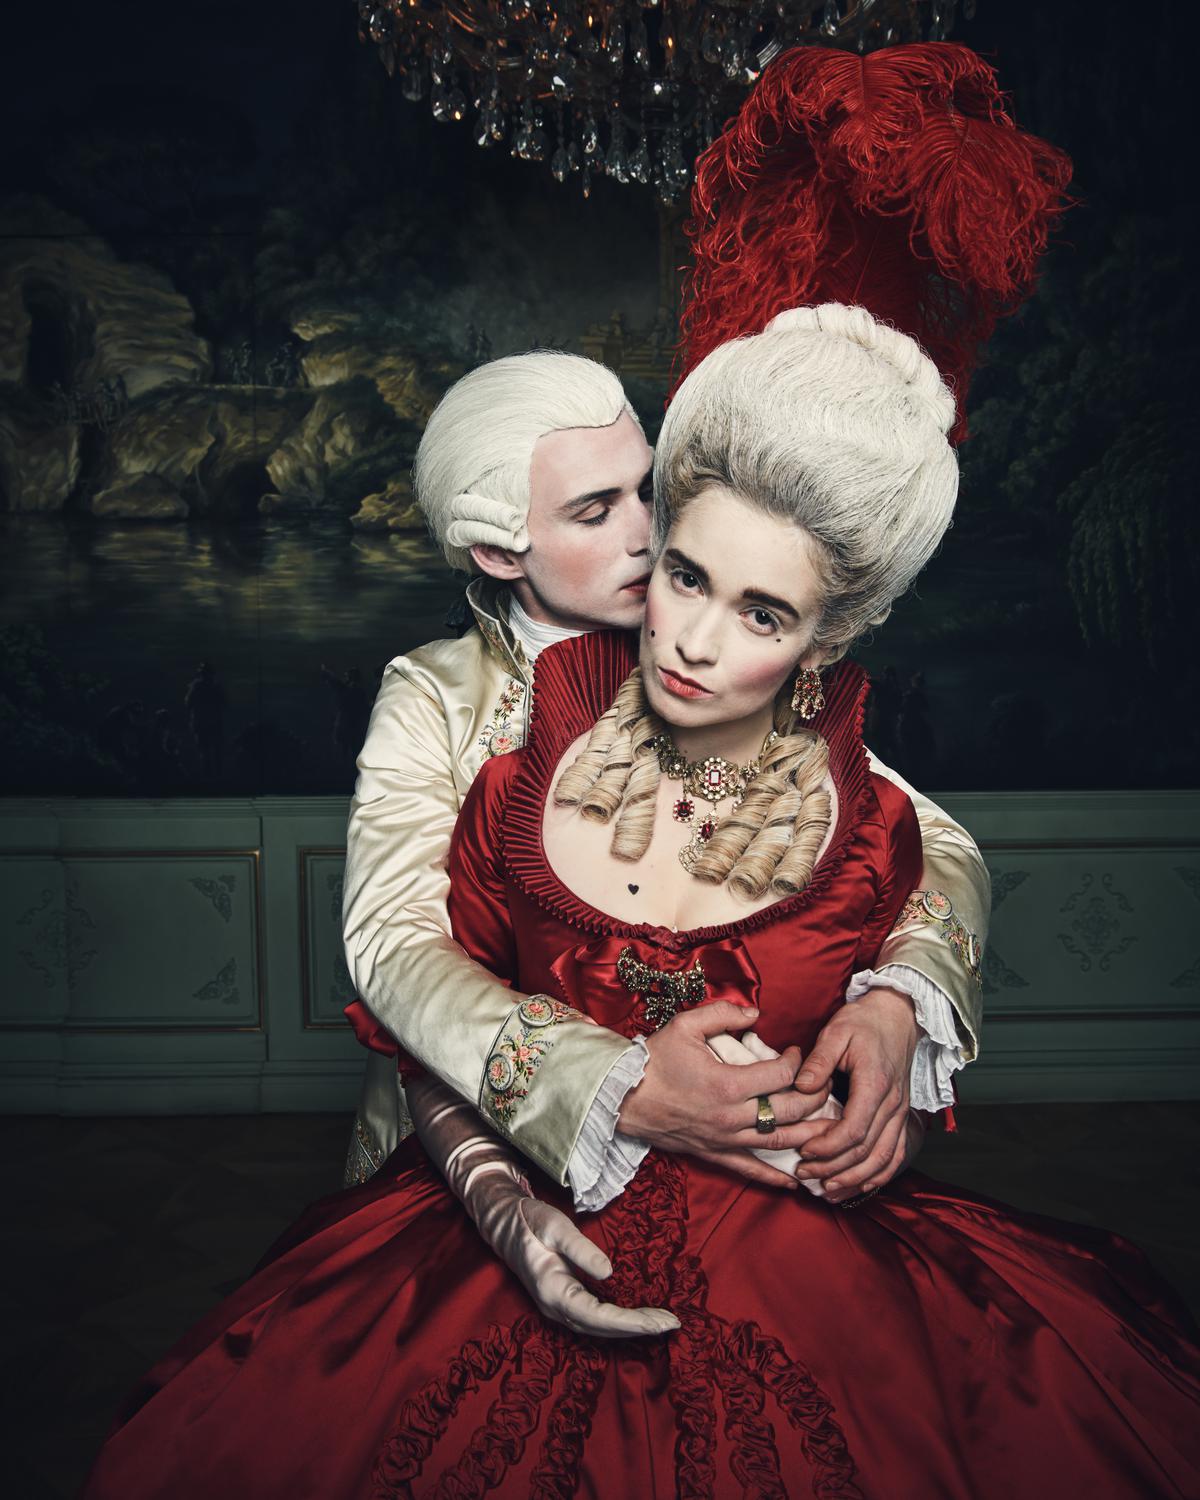 Nicholas Denton as Pascal Valmont and Alice Englert as Camille in Dangerous Liaisons 